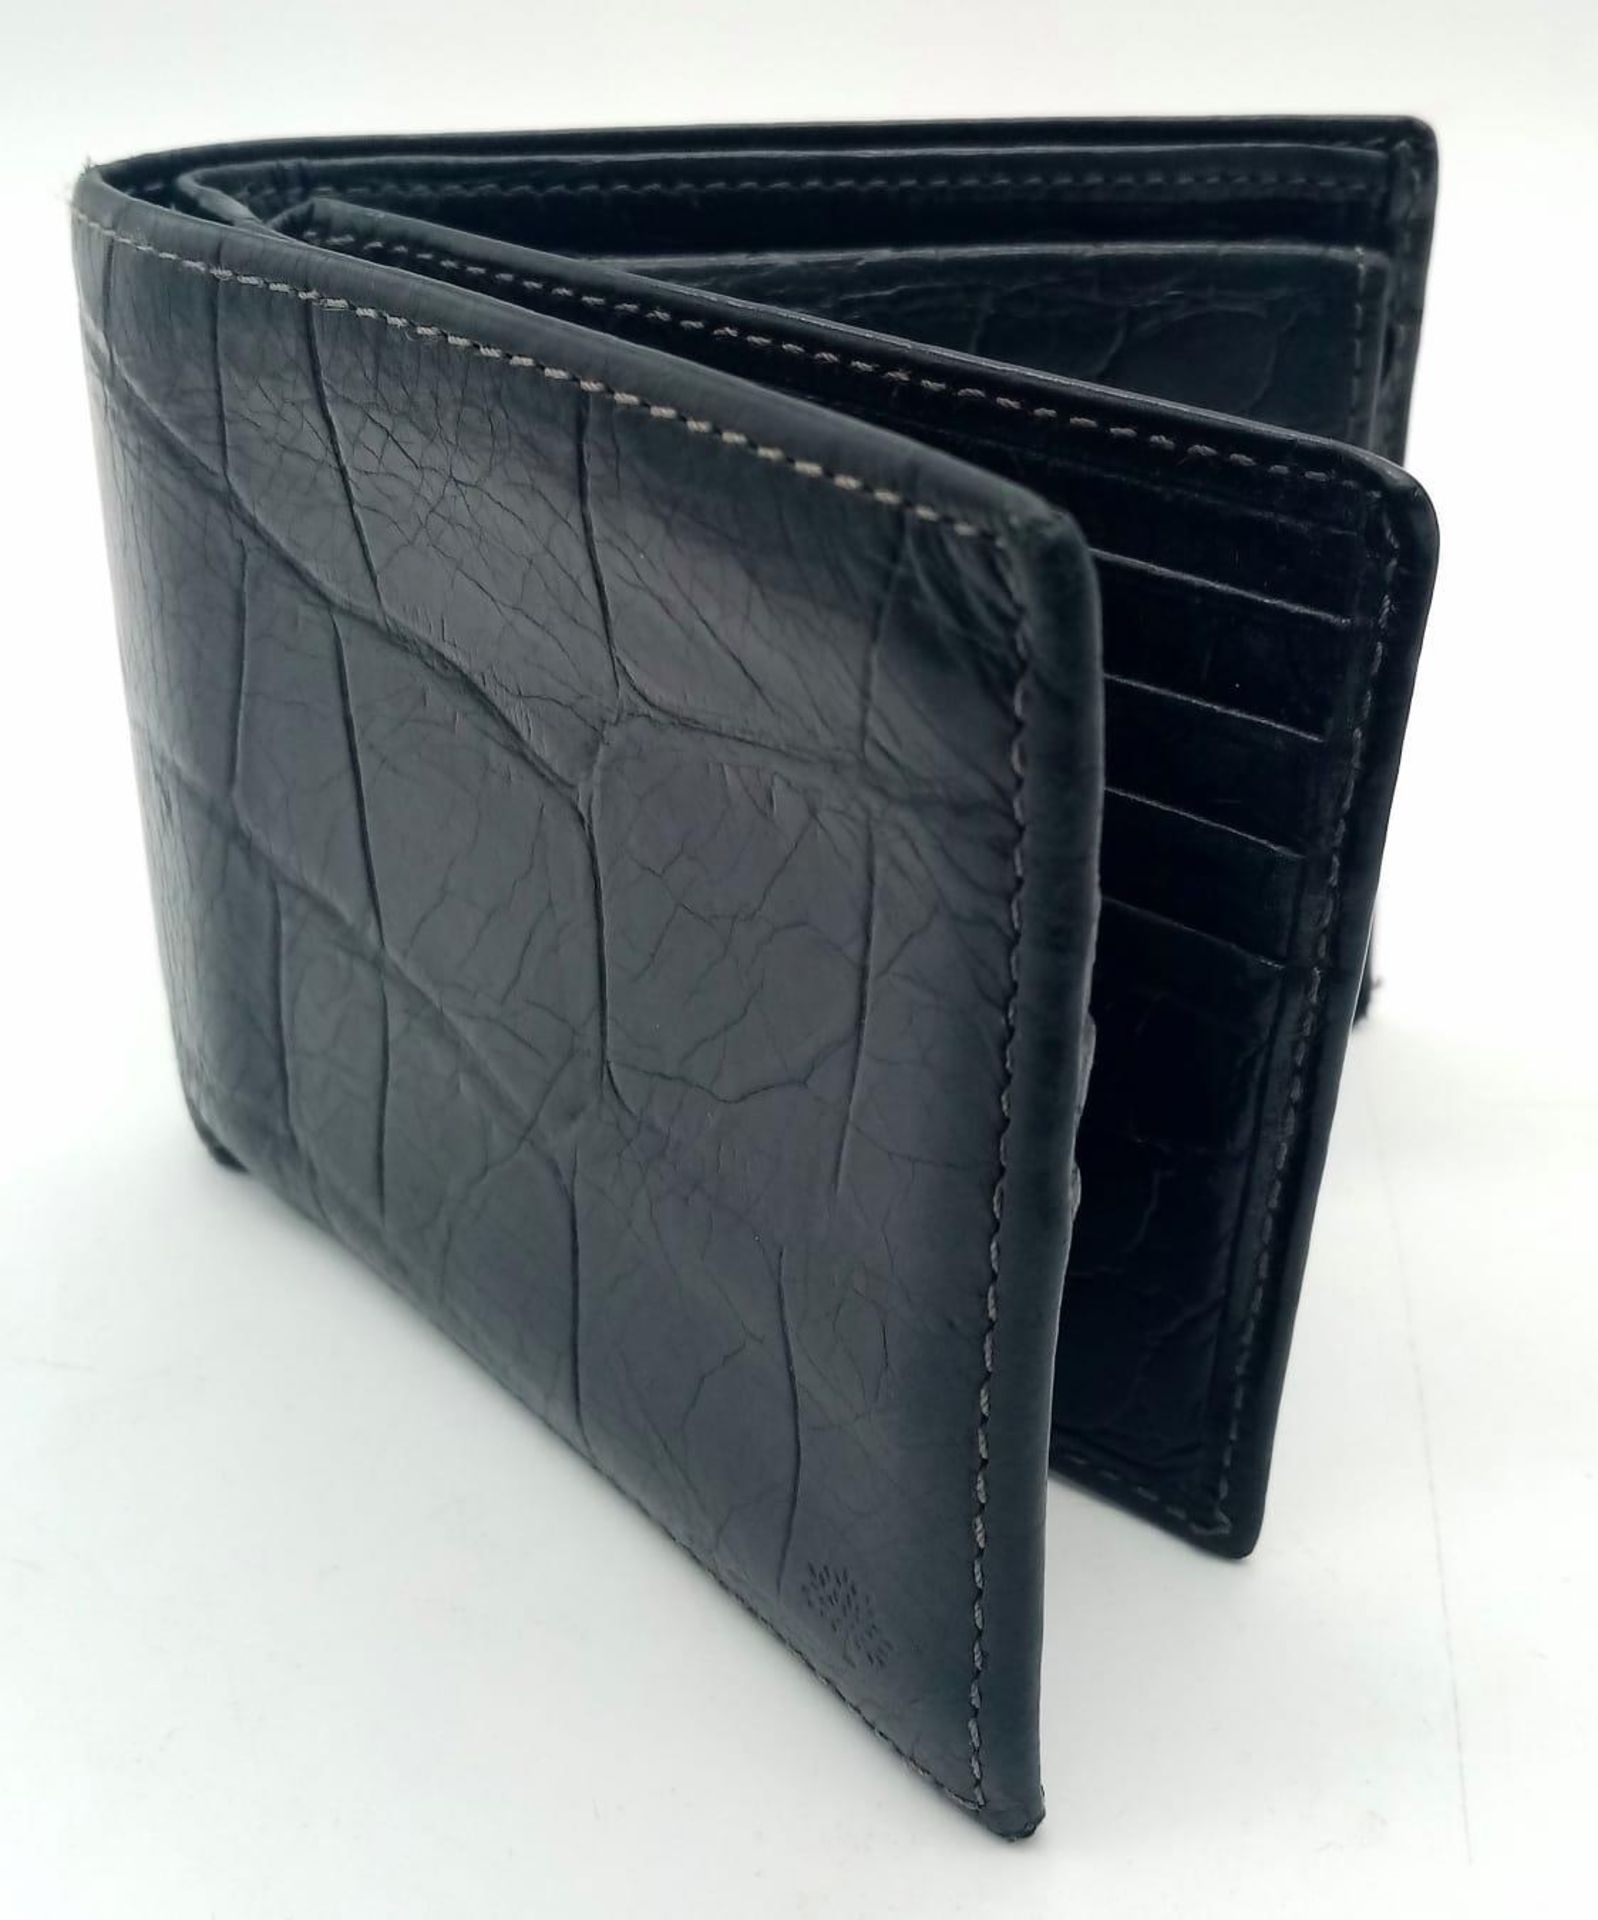 A black leather Mulberry wallet, can hold up to 8 cards, includes a coin pouch. Size approx. 11x9cm.